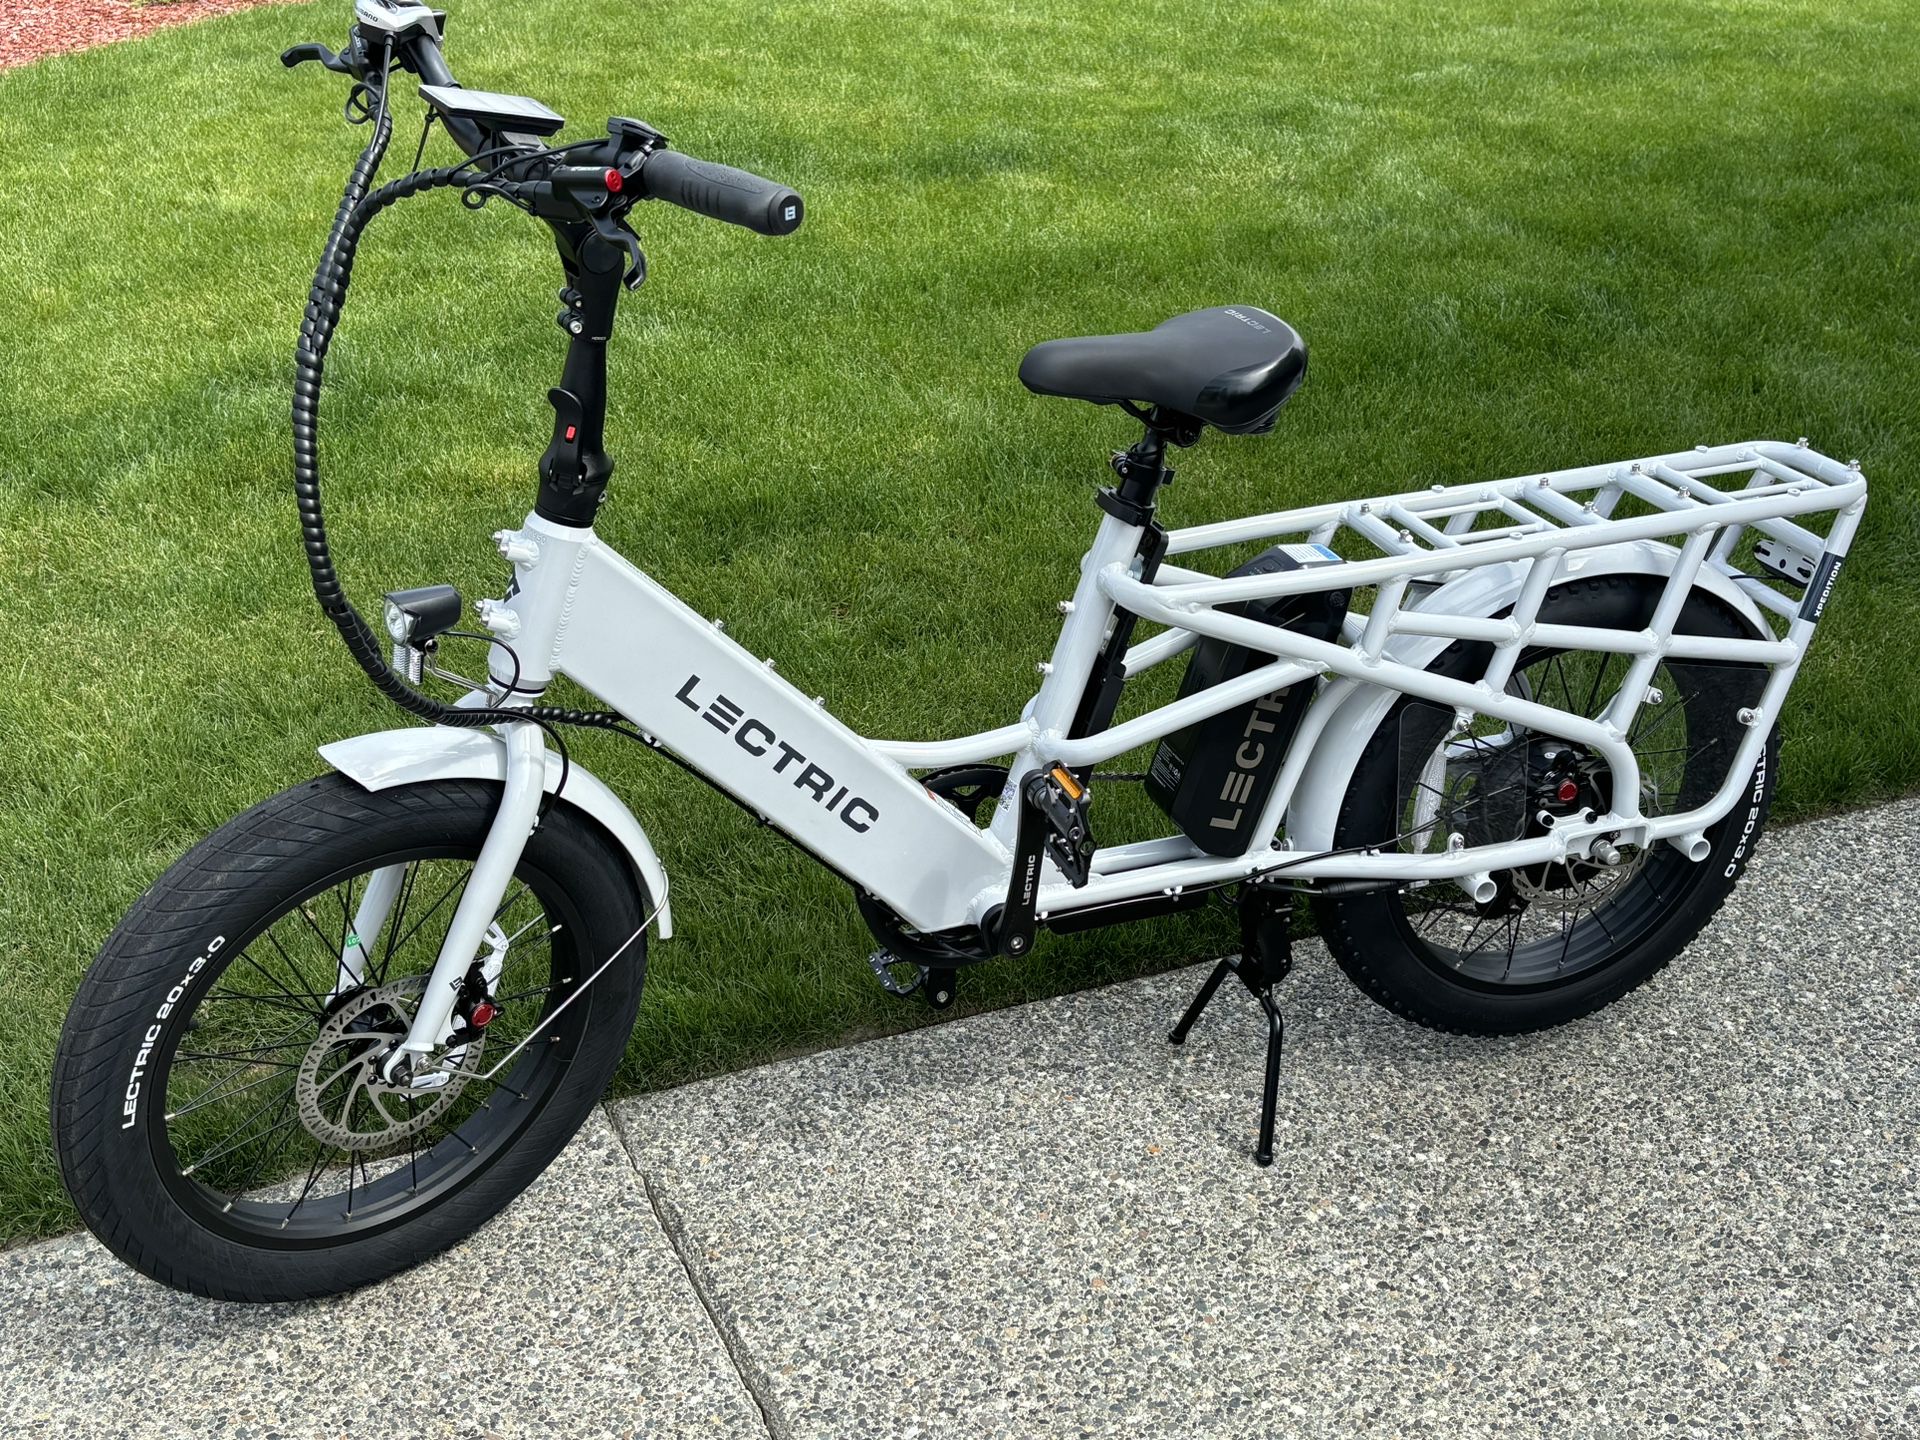 Lectric Xpedition Cargo E-bike/price Is Bike Only No Accessories.  Bike And Accessories Priced In Description 